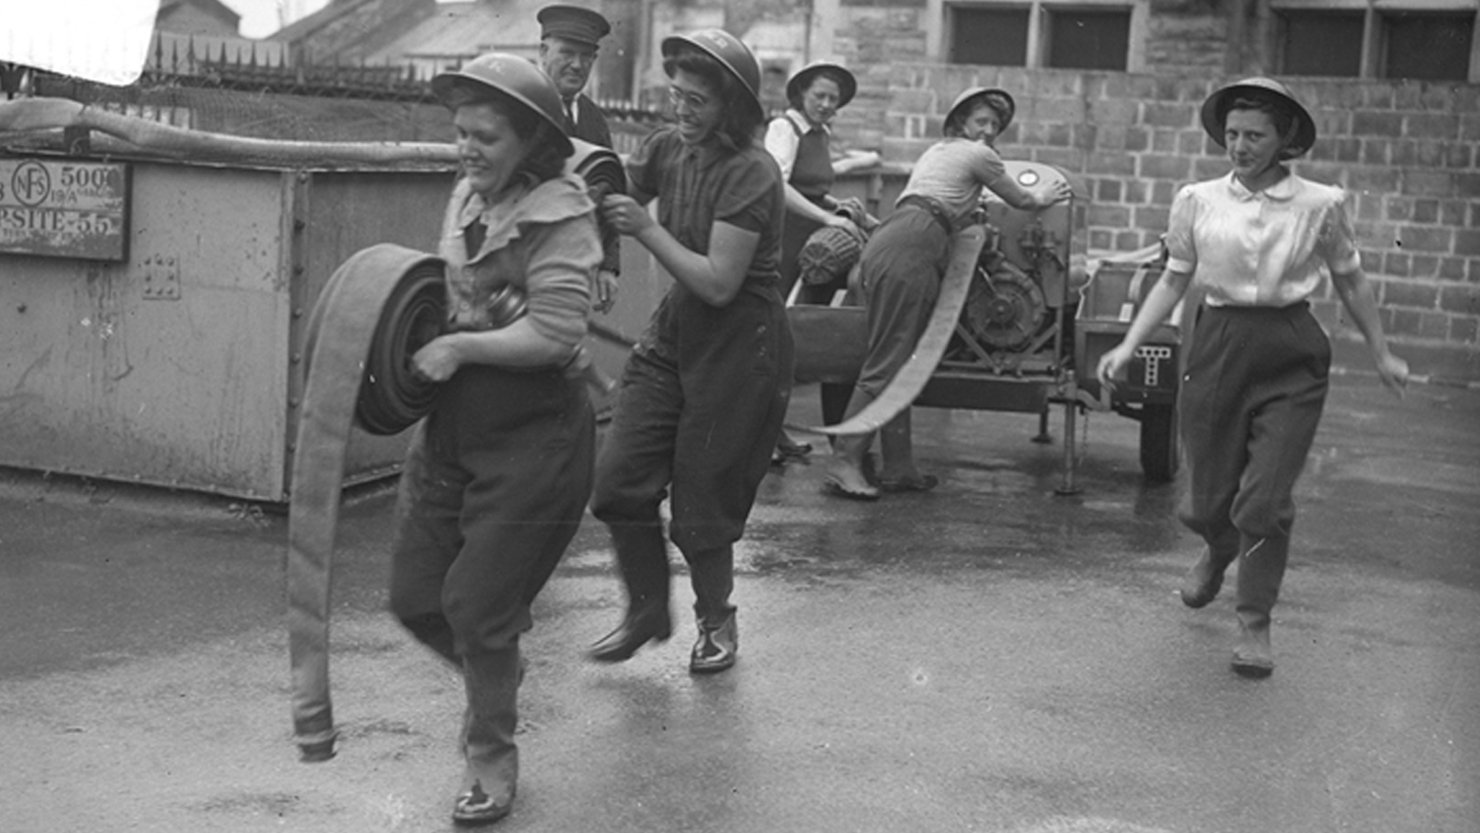 Members of the Women’s Auxiliary Fire Service in action during WWII. Courtesy of The Box, Plymouth